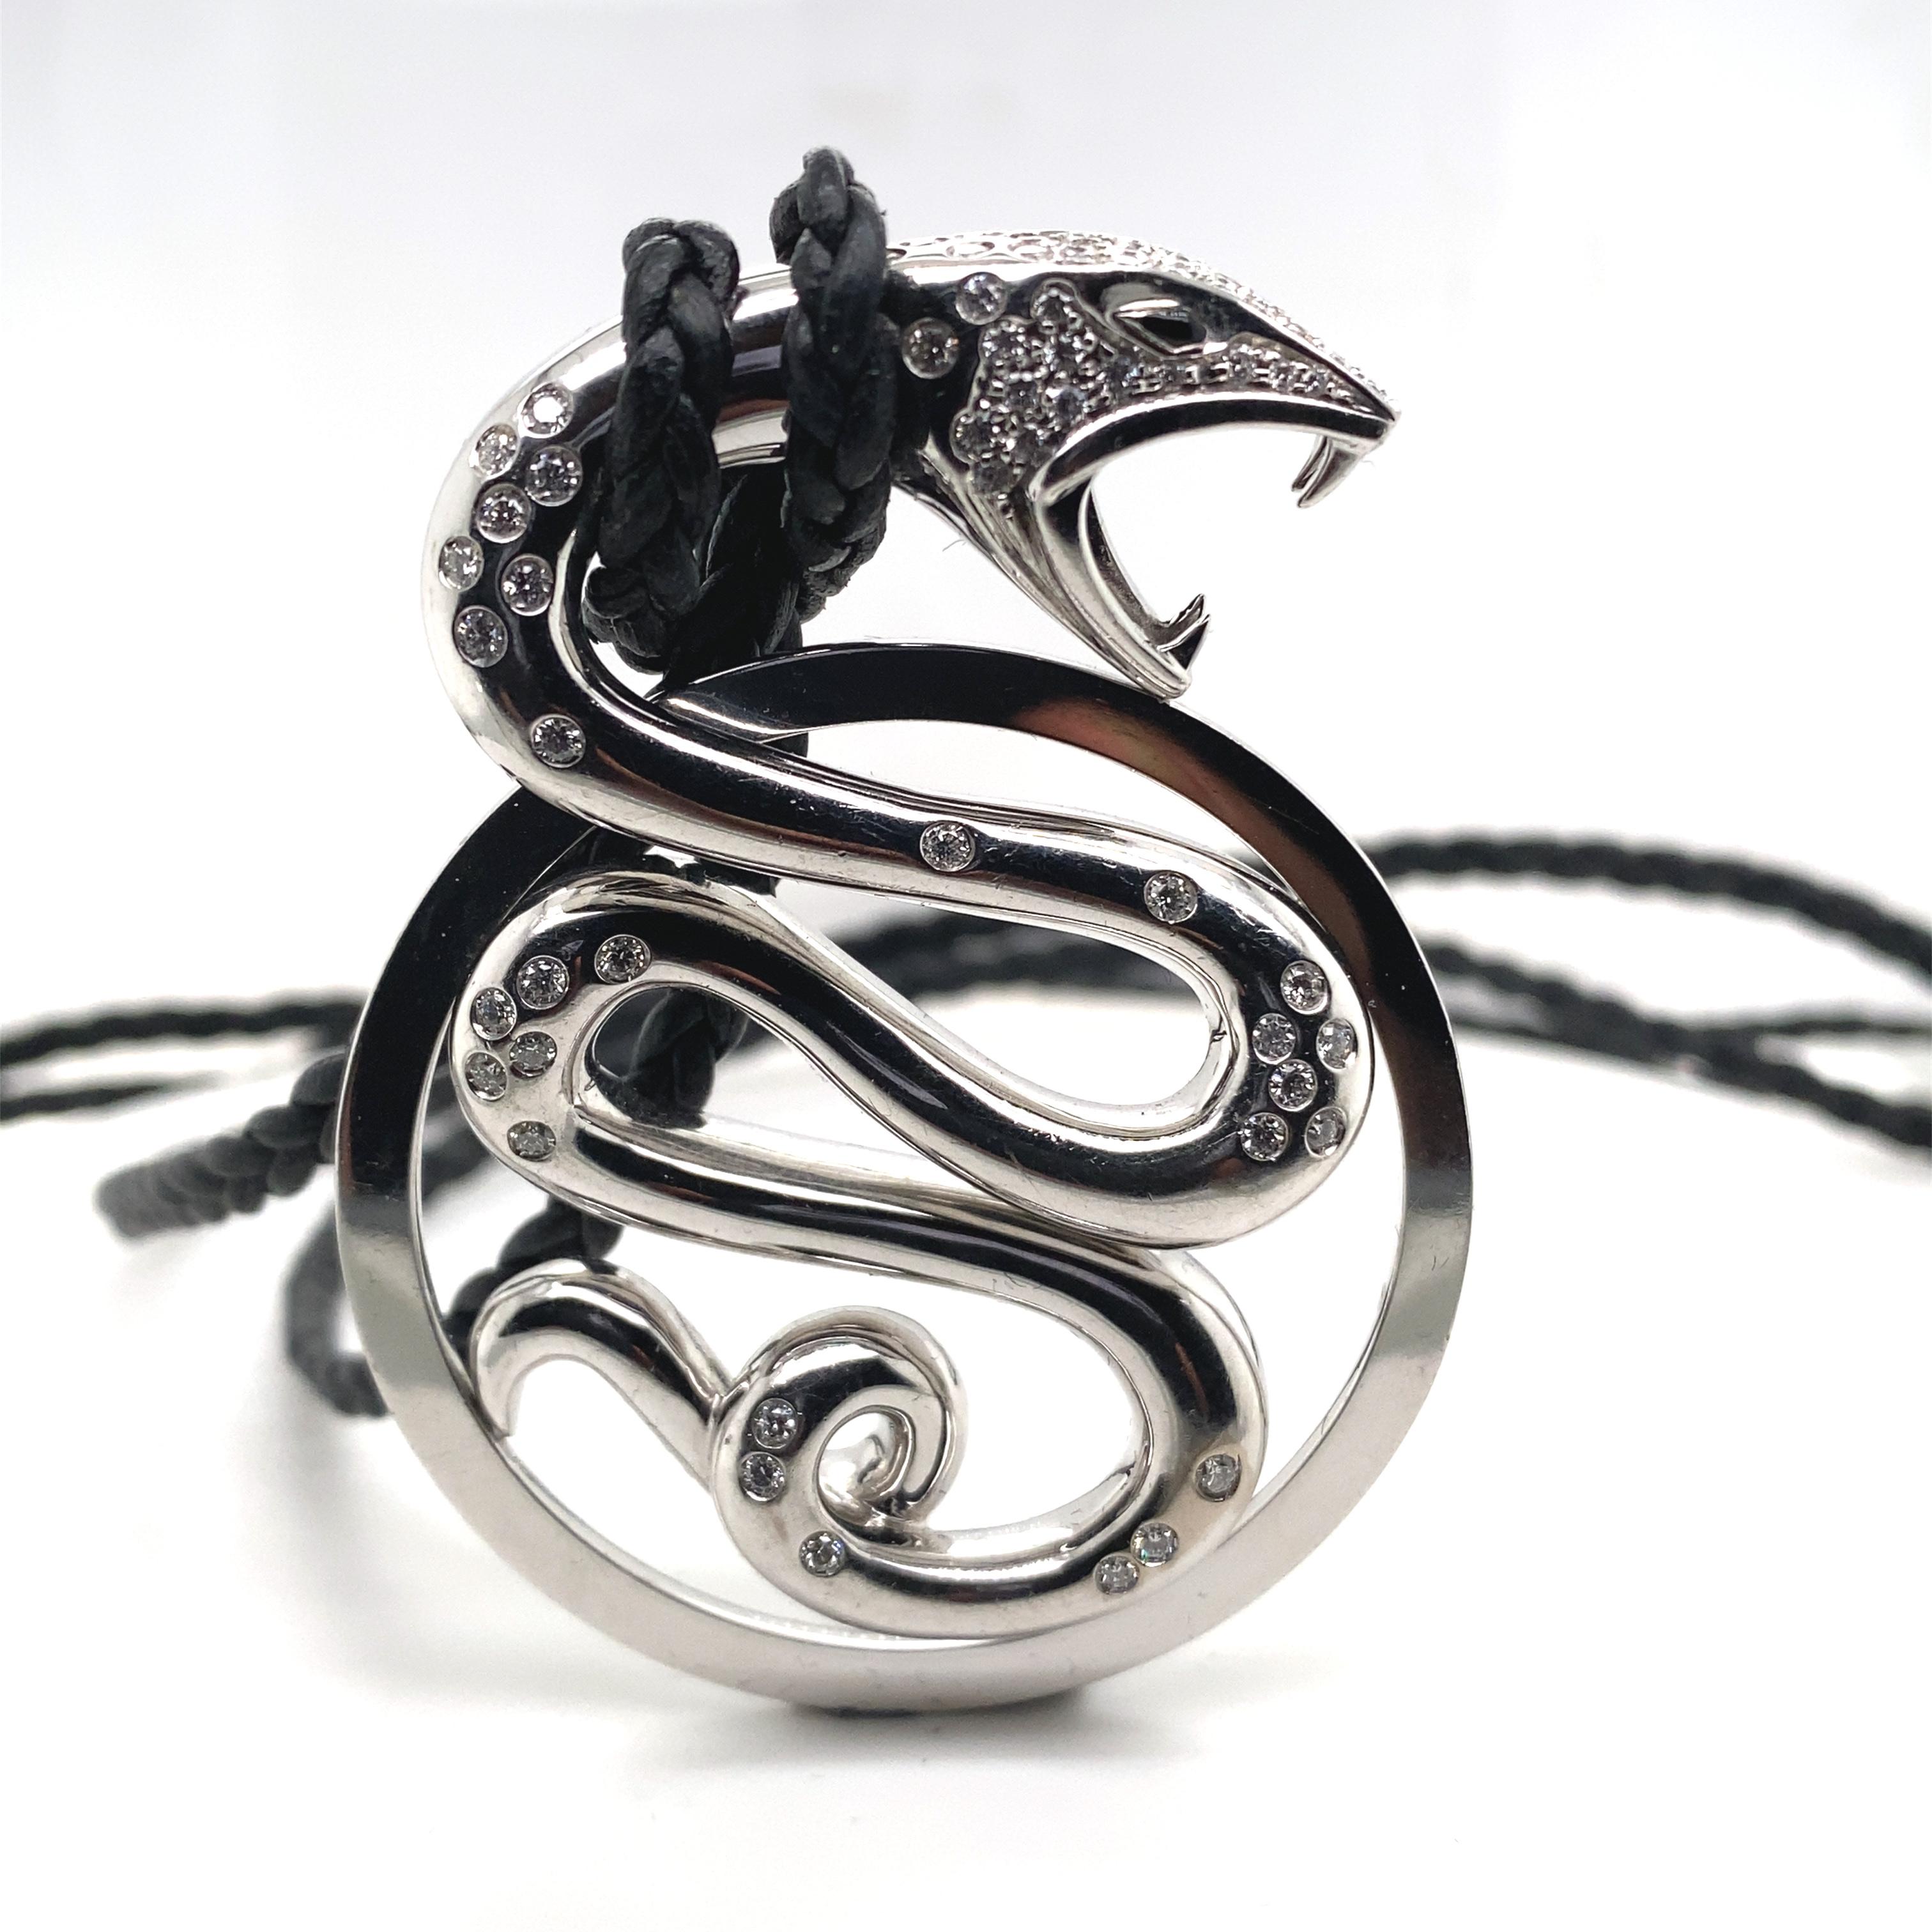 A Boucheron diamond snake 'Trouble' 18 karat white gold Large Pendant Necklace, circa 2005

This striking pendant from the 'Trouble' collection by Boucheron is formed as a snake, an iconic guardian and a cultural symbol of protection it has black